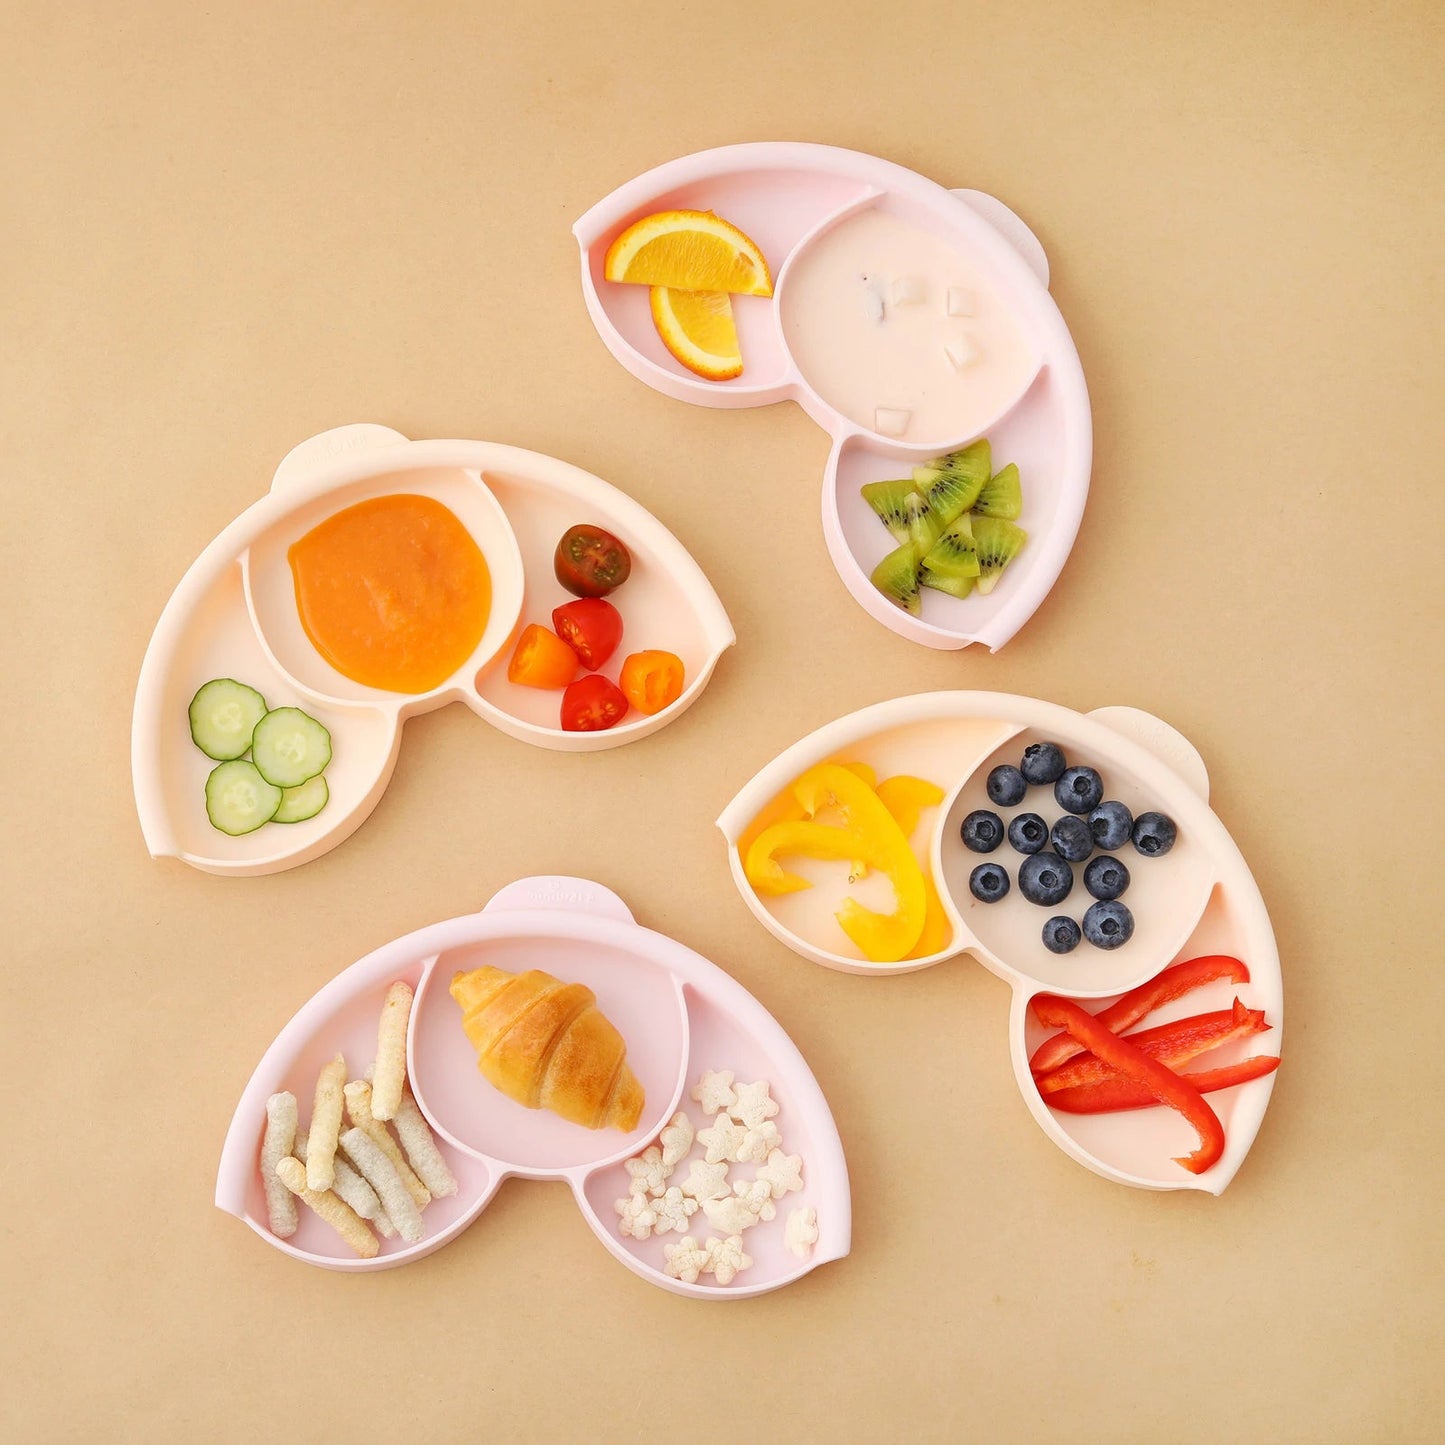 Healthy Meal Set  (Toffee/Peach)